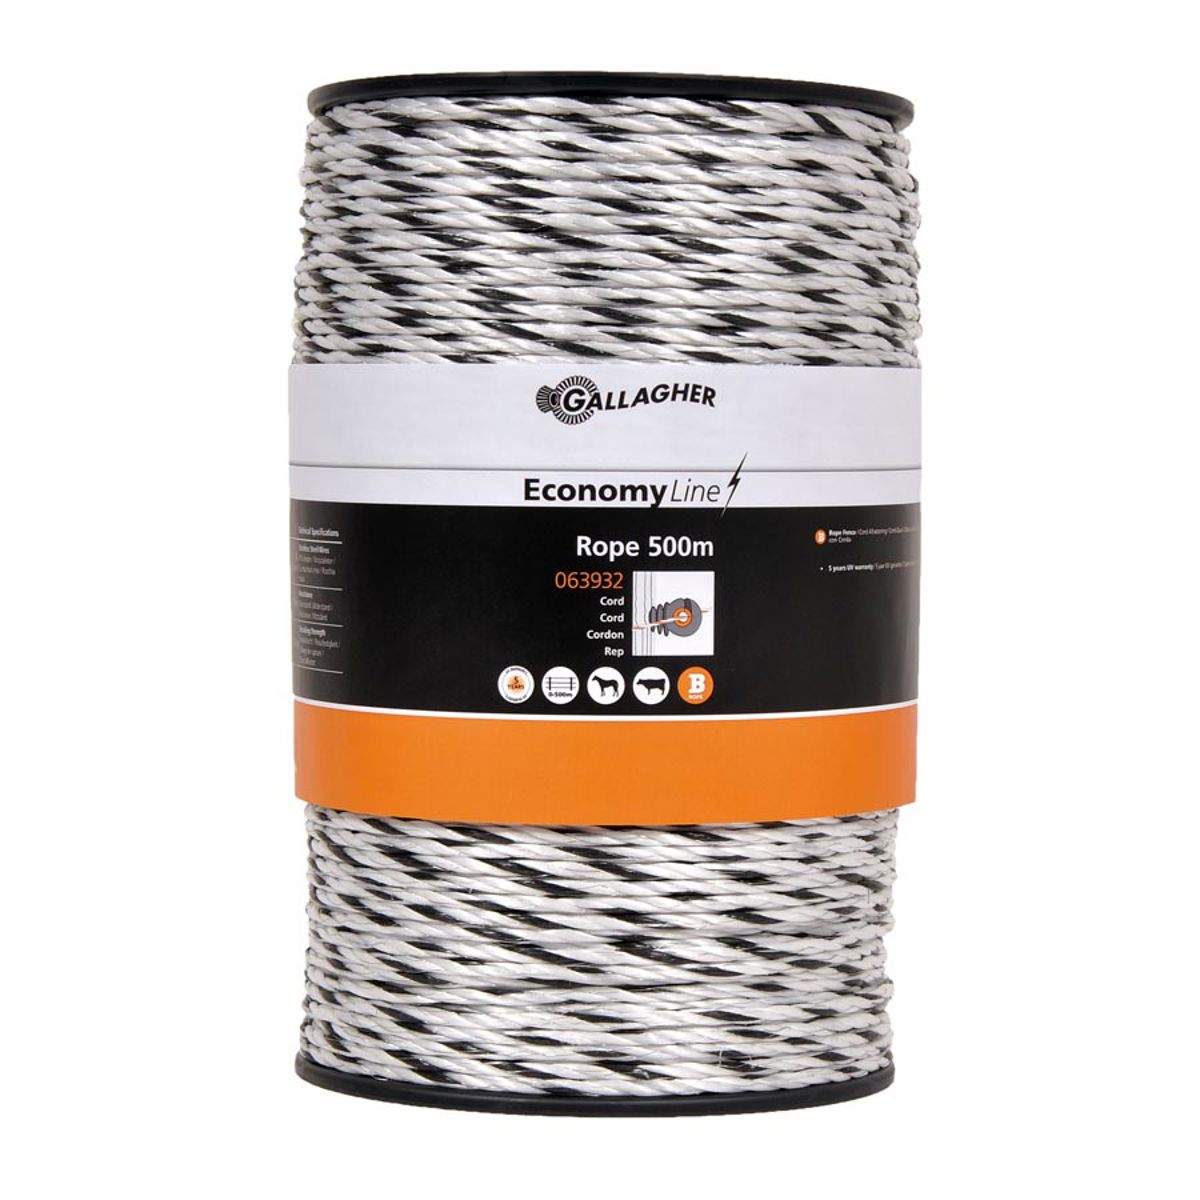 Gallagher economyline cord wit 500m | 8713235063932